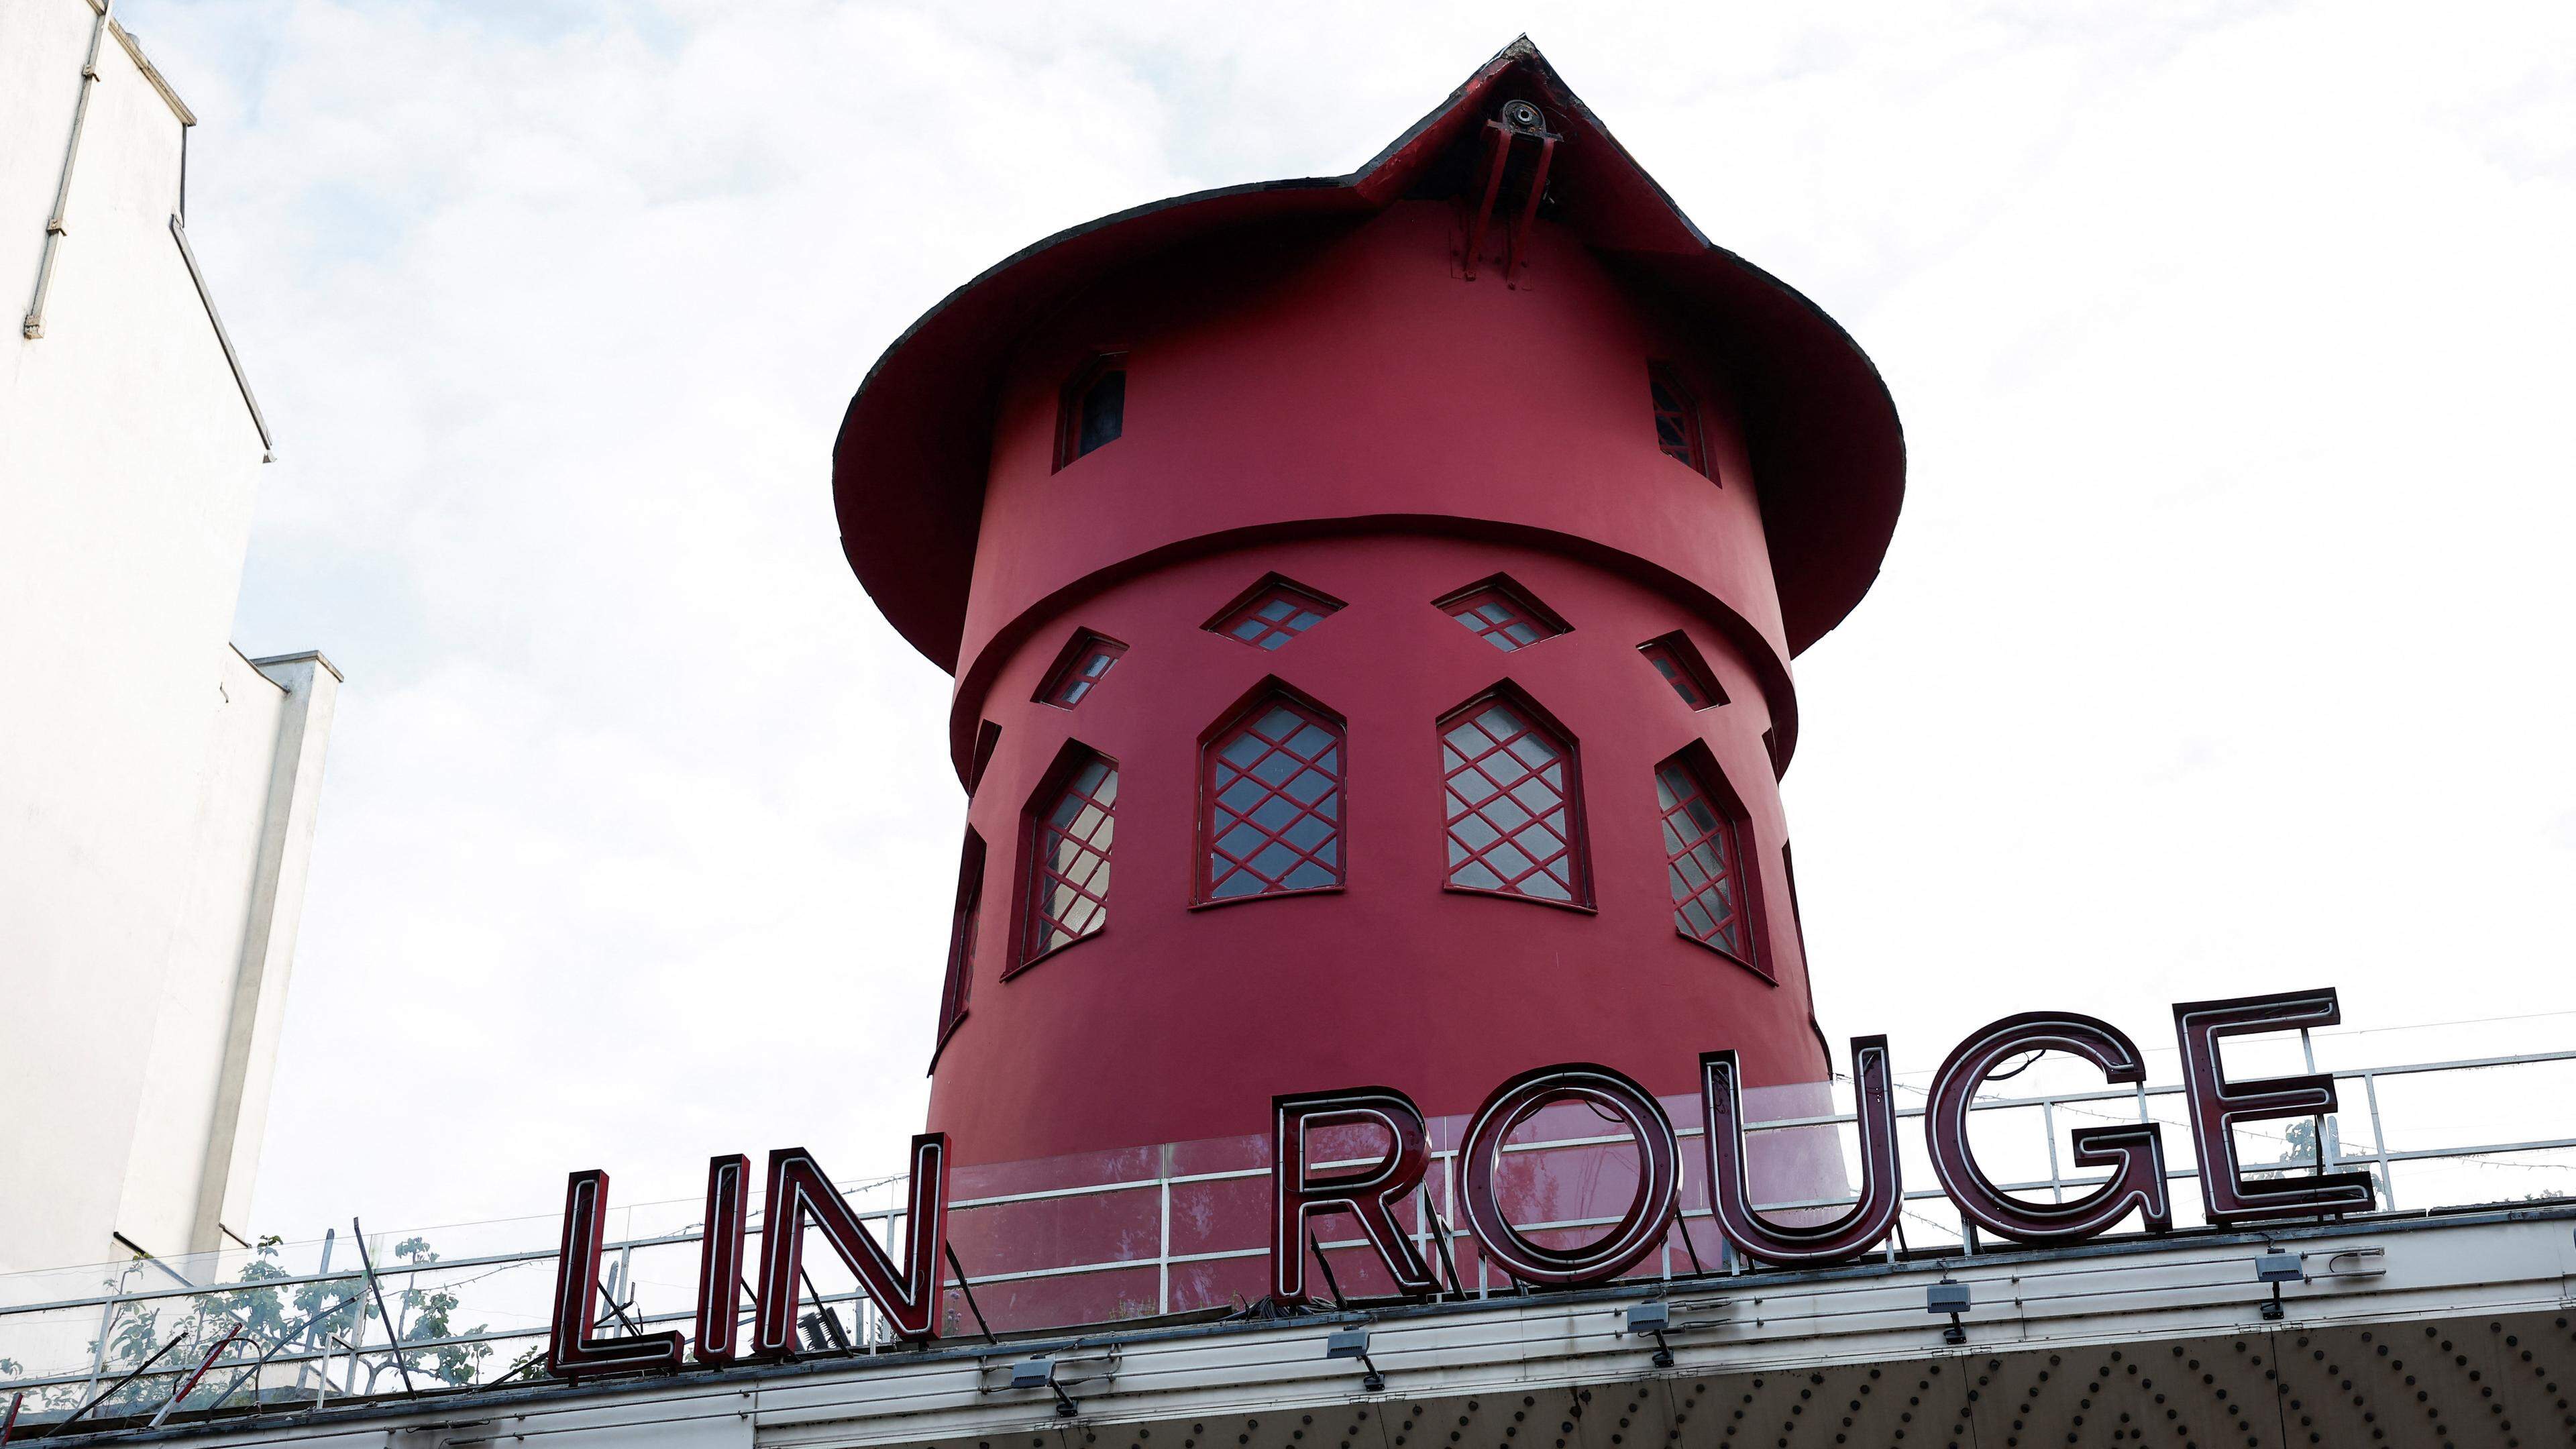 A view of the landmark red windmill atop the Moulin Rouge, Paris' most famous cabaret club, after its sails fell off during the night in Paris, France, April 25, 2024. REUTERS/Benoit Tessier